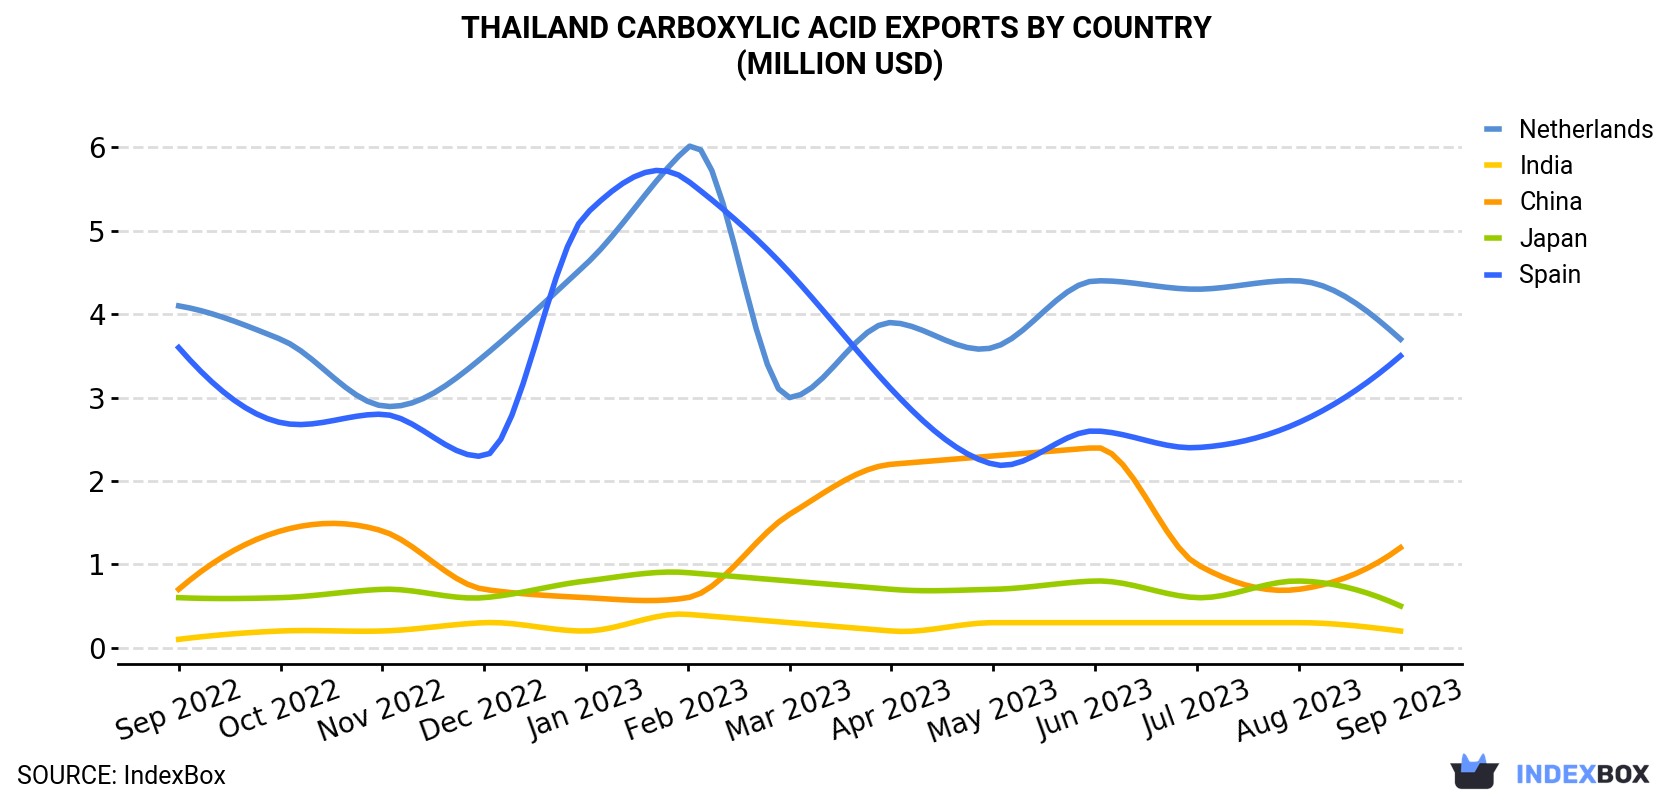 Thailand Carboxylic Acid Exports By Country (Million USD)